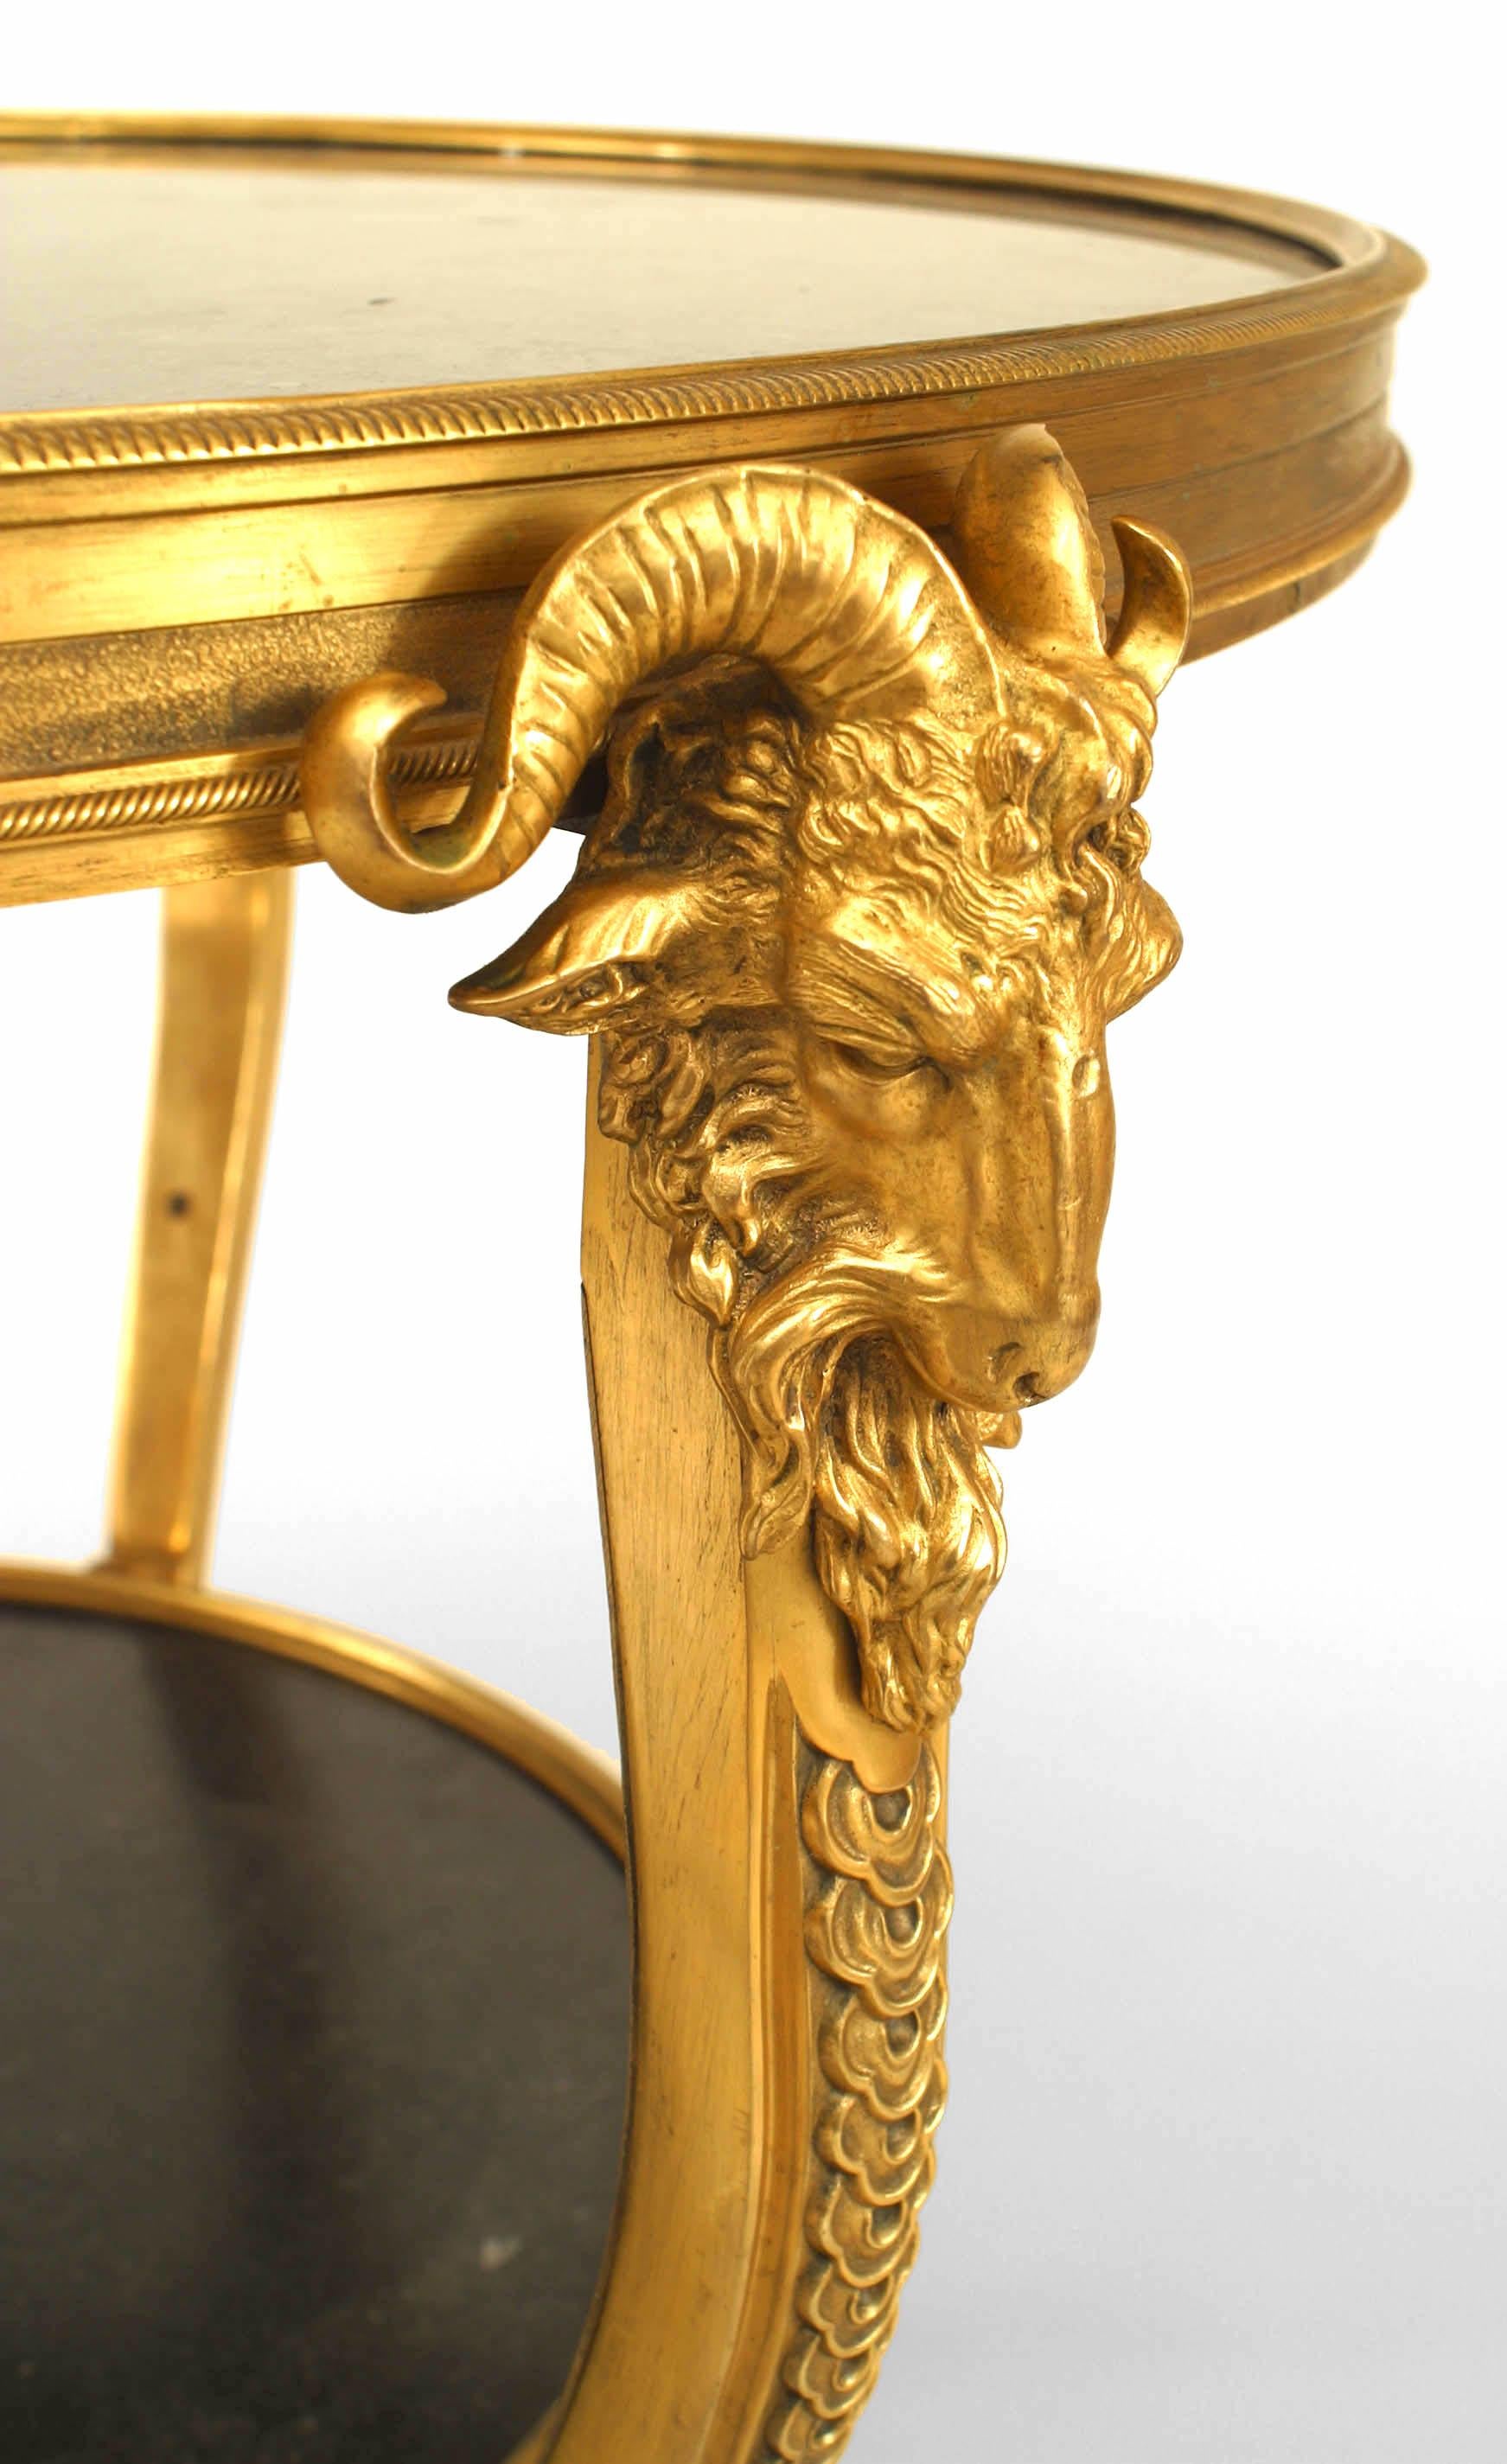 French Louis XVI-style (19/20th Century) bronze dore ram head design round end table with 3 legs supporting an inset black marble top and shelf with a bottom stretcher.
